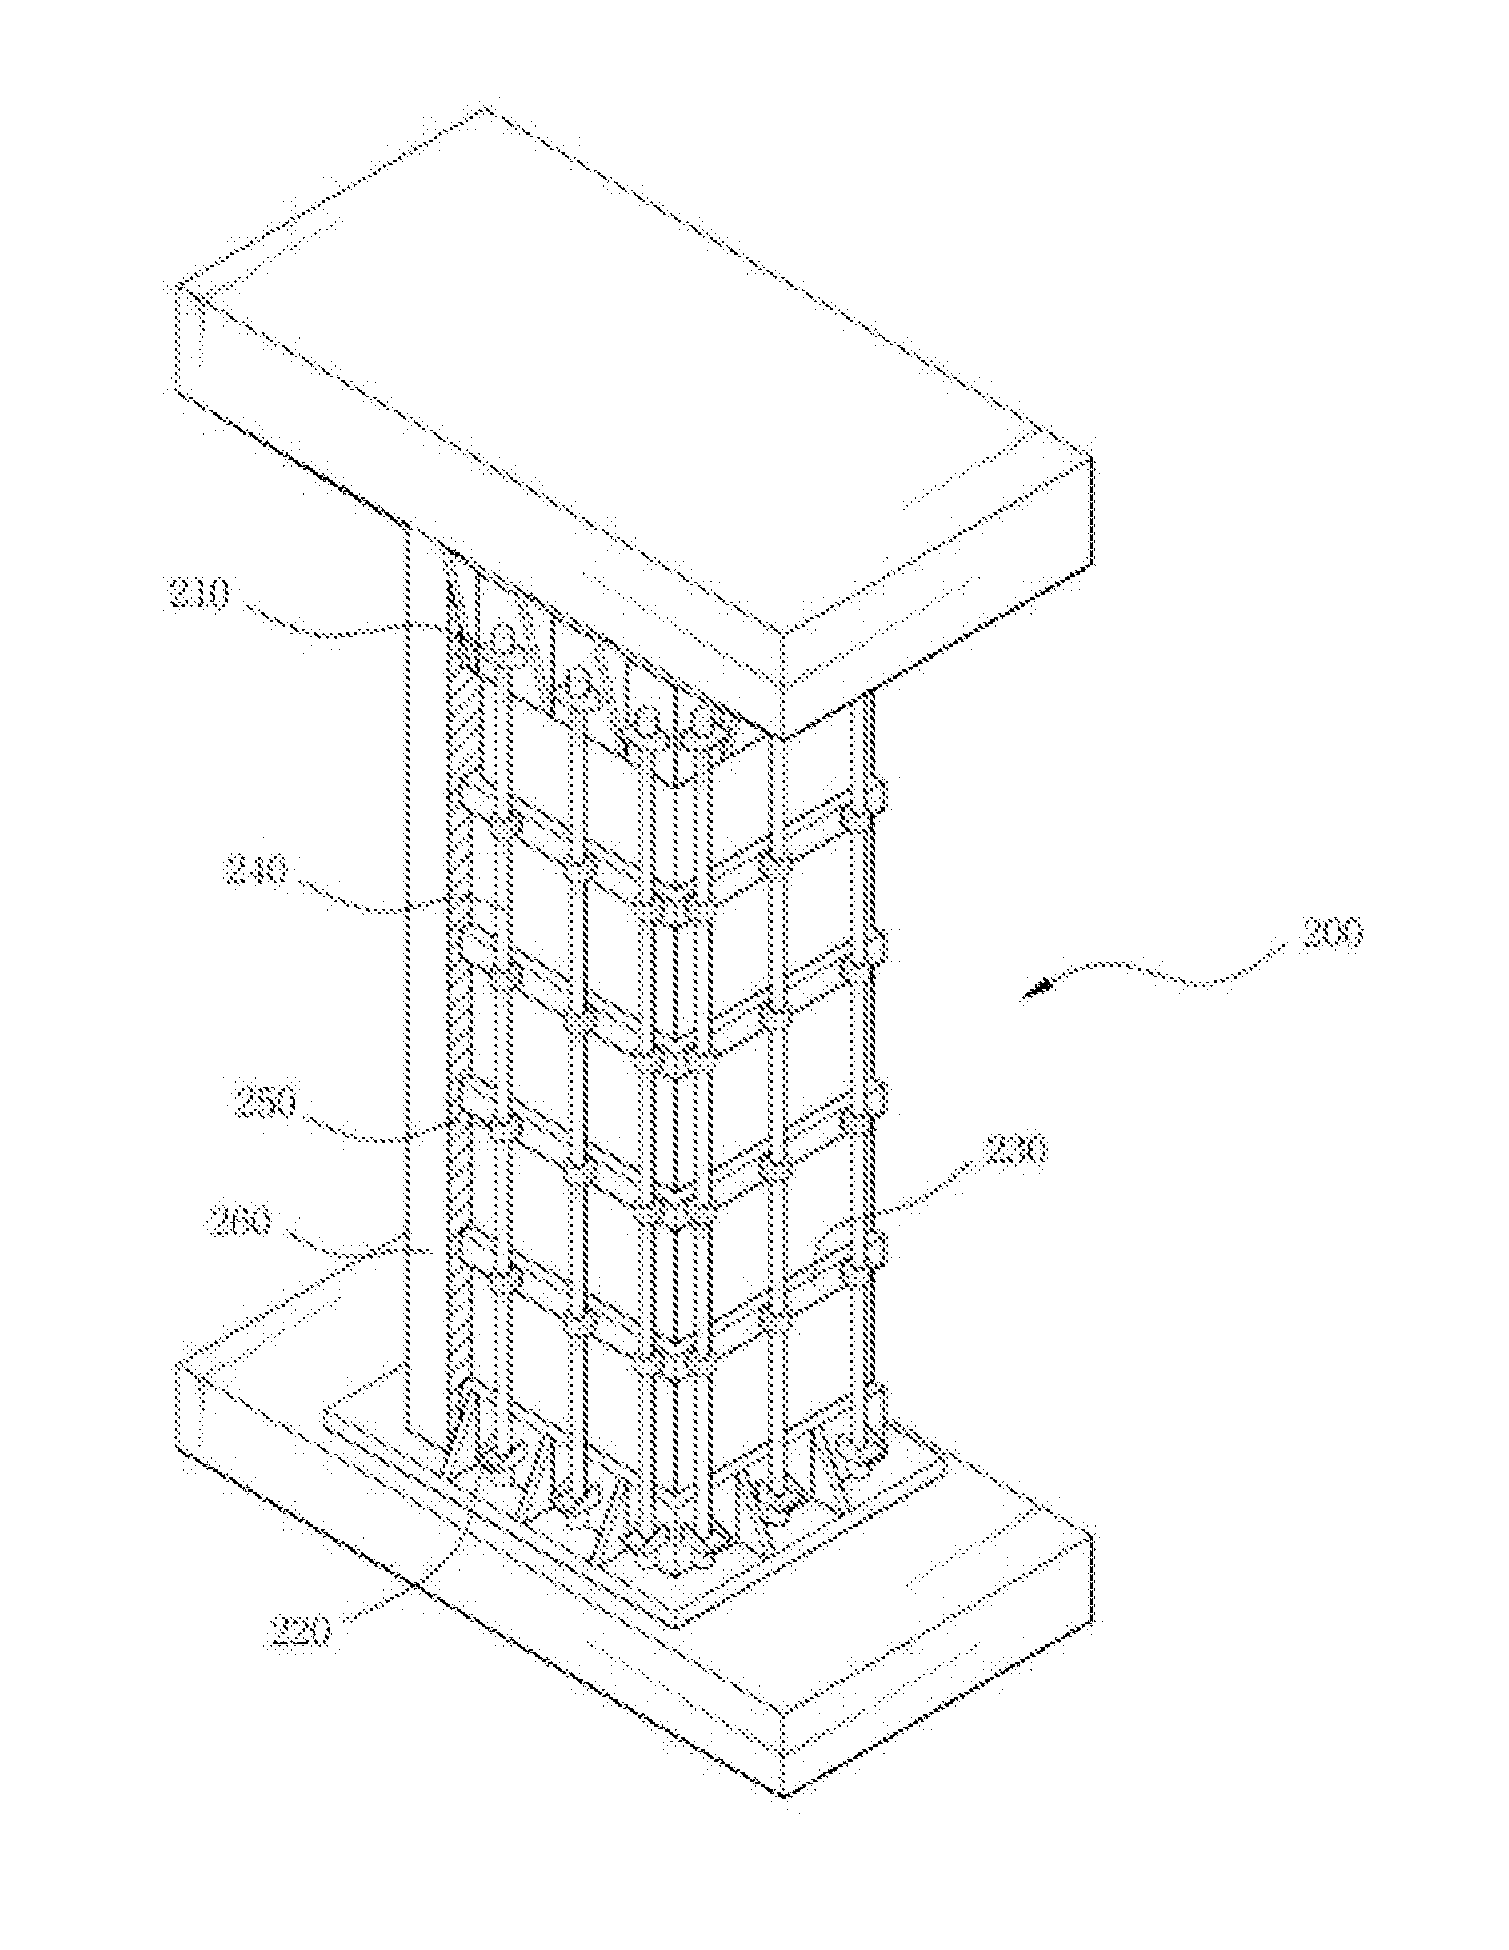 Structure for strengthening of building column structures